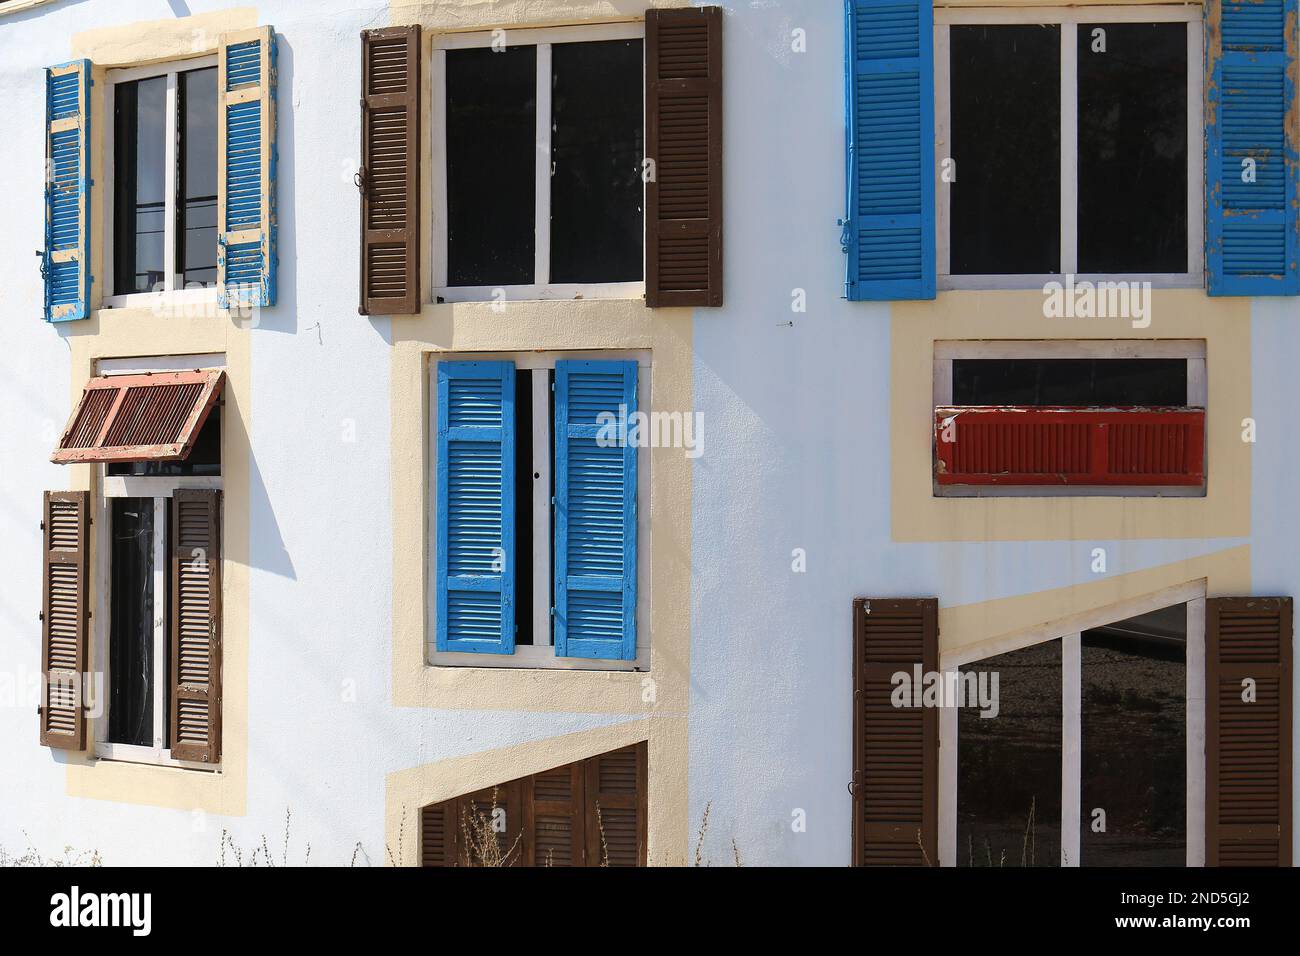 Facade of a building with multiple windows. with different colors and shapes. Stock Photo